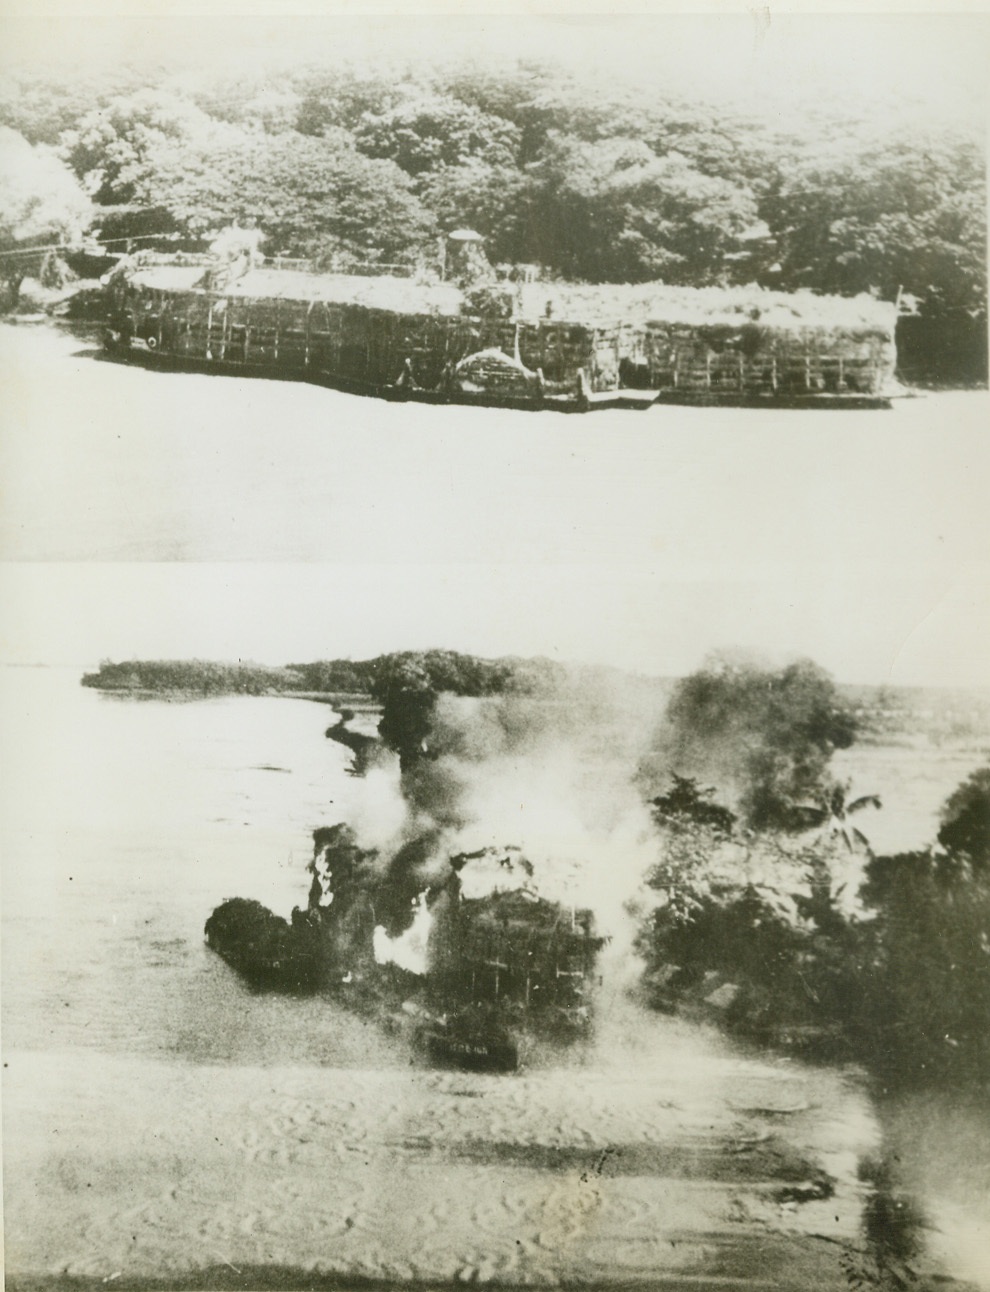 JAPS USE HOUSEBOATS AS BURMA HEADQUARTERS, 2/16/1944. SOMEWHERE IN BURMA – Japanese commanders use well camouflaged houseboats as headquarters on Burma rivers, thus hoping to escape air attack. Top photo shows how houseboat blends into jungle growth as background. Bottom: Proof that the camouflaged headquarters did not fool crew members of the R.A.F. Beaufighter which set the boat afire with cannon shells and bombs. Credit: ACME;